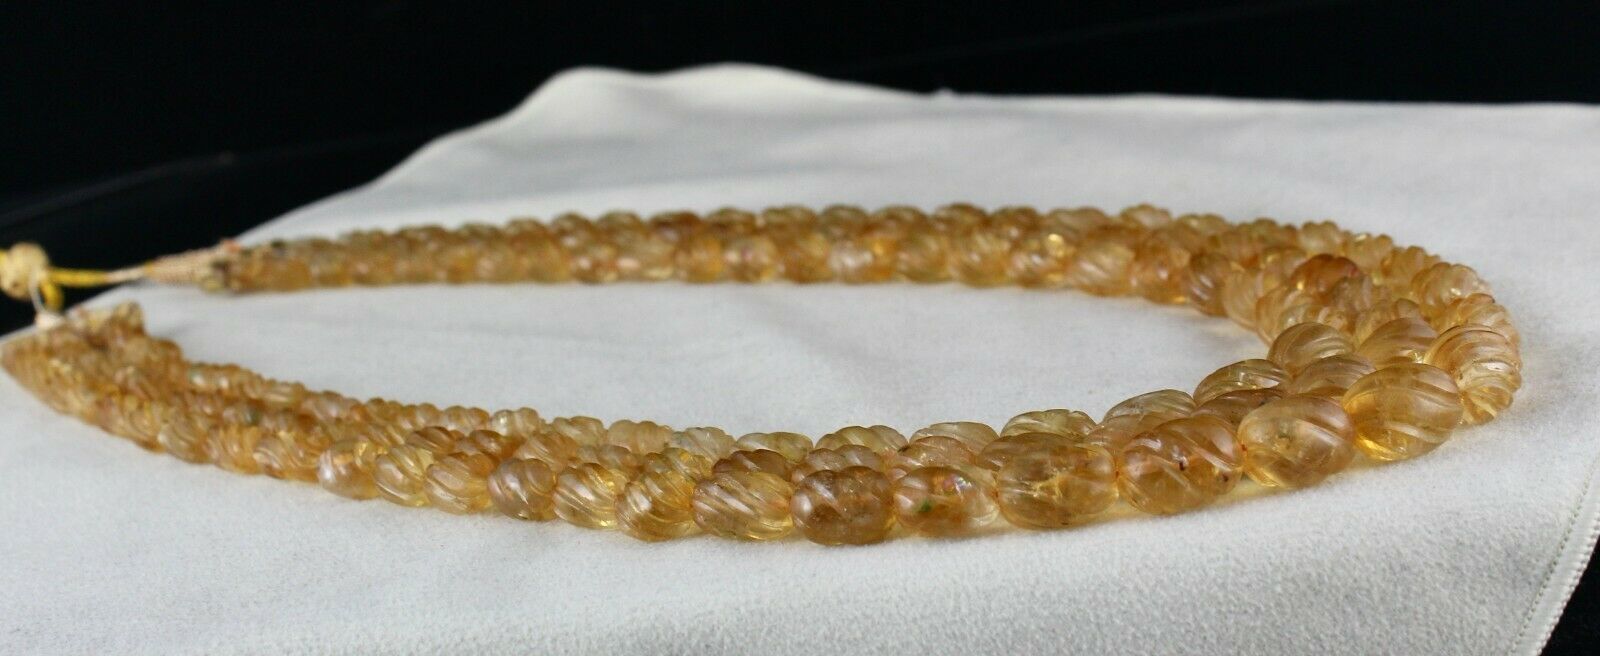 BEAUTIFUL ATTRACTIVE 345.00 CTS NATURAL YELLOW CITRINE BEADS NECKLACE STRAND 